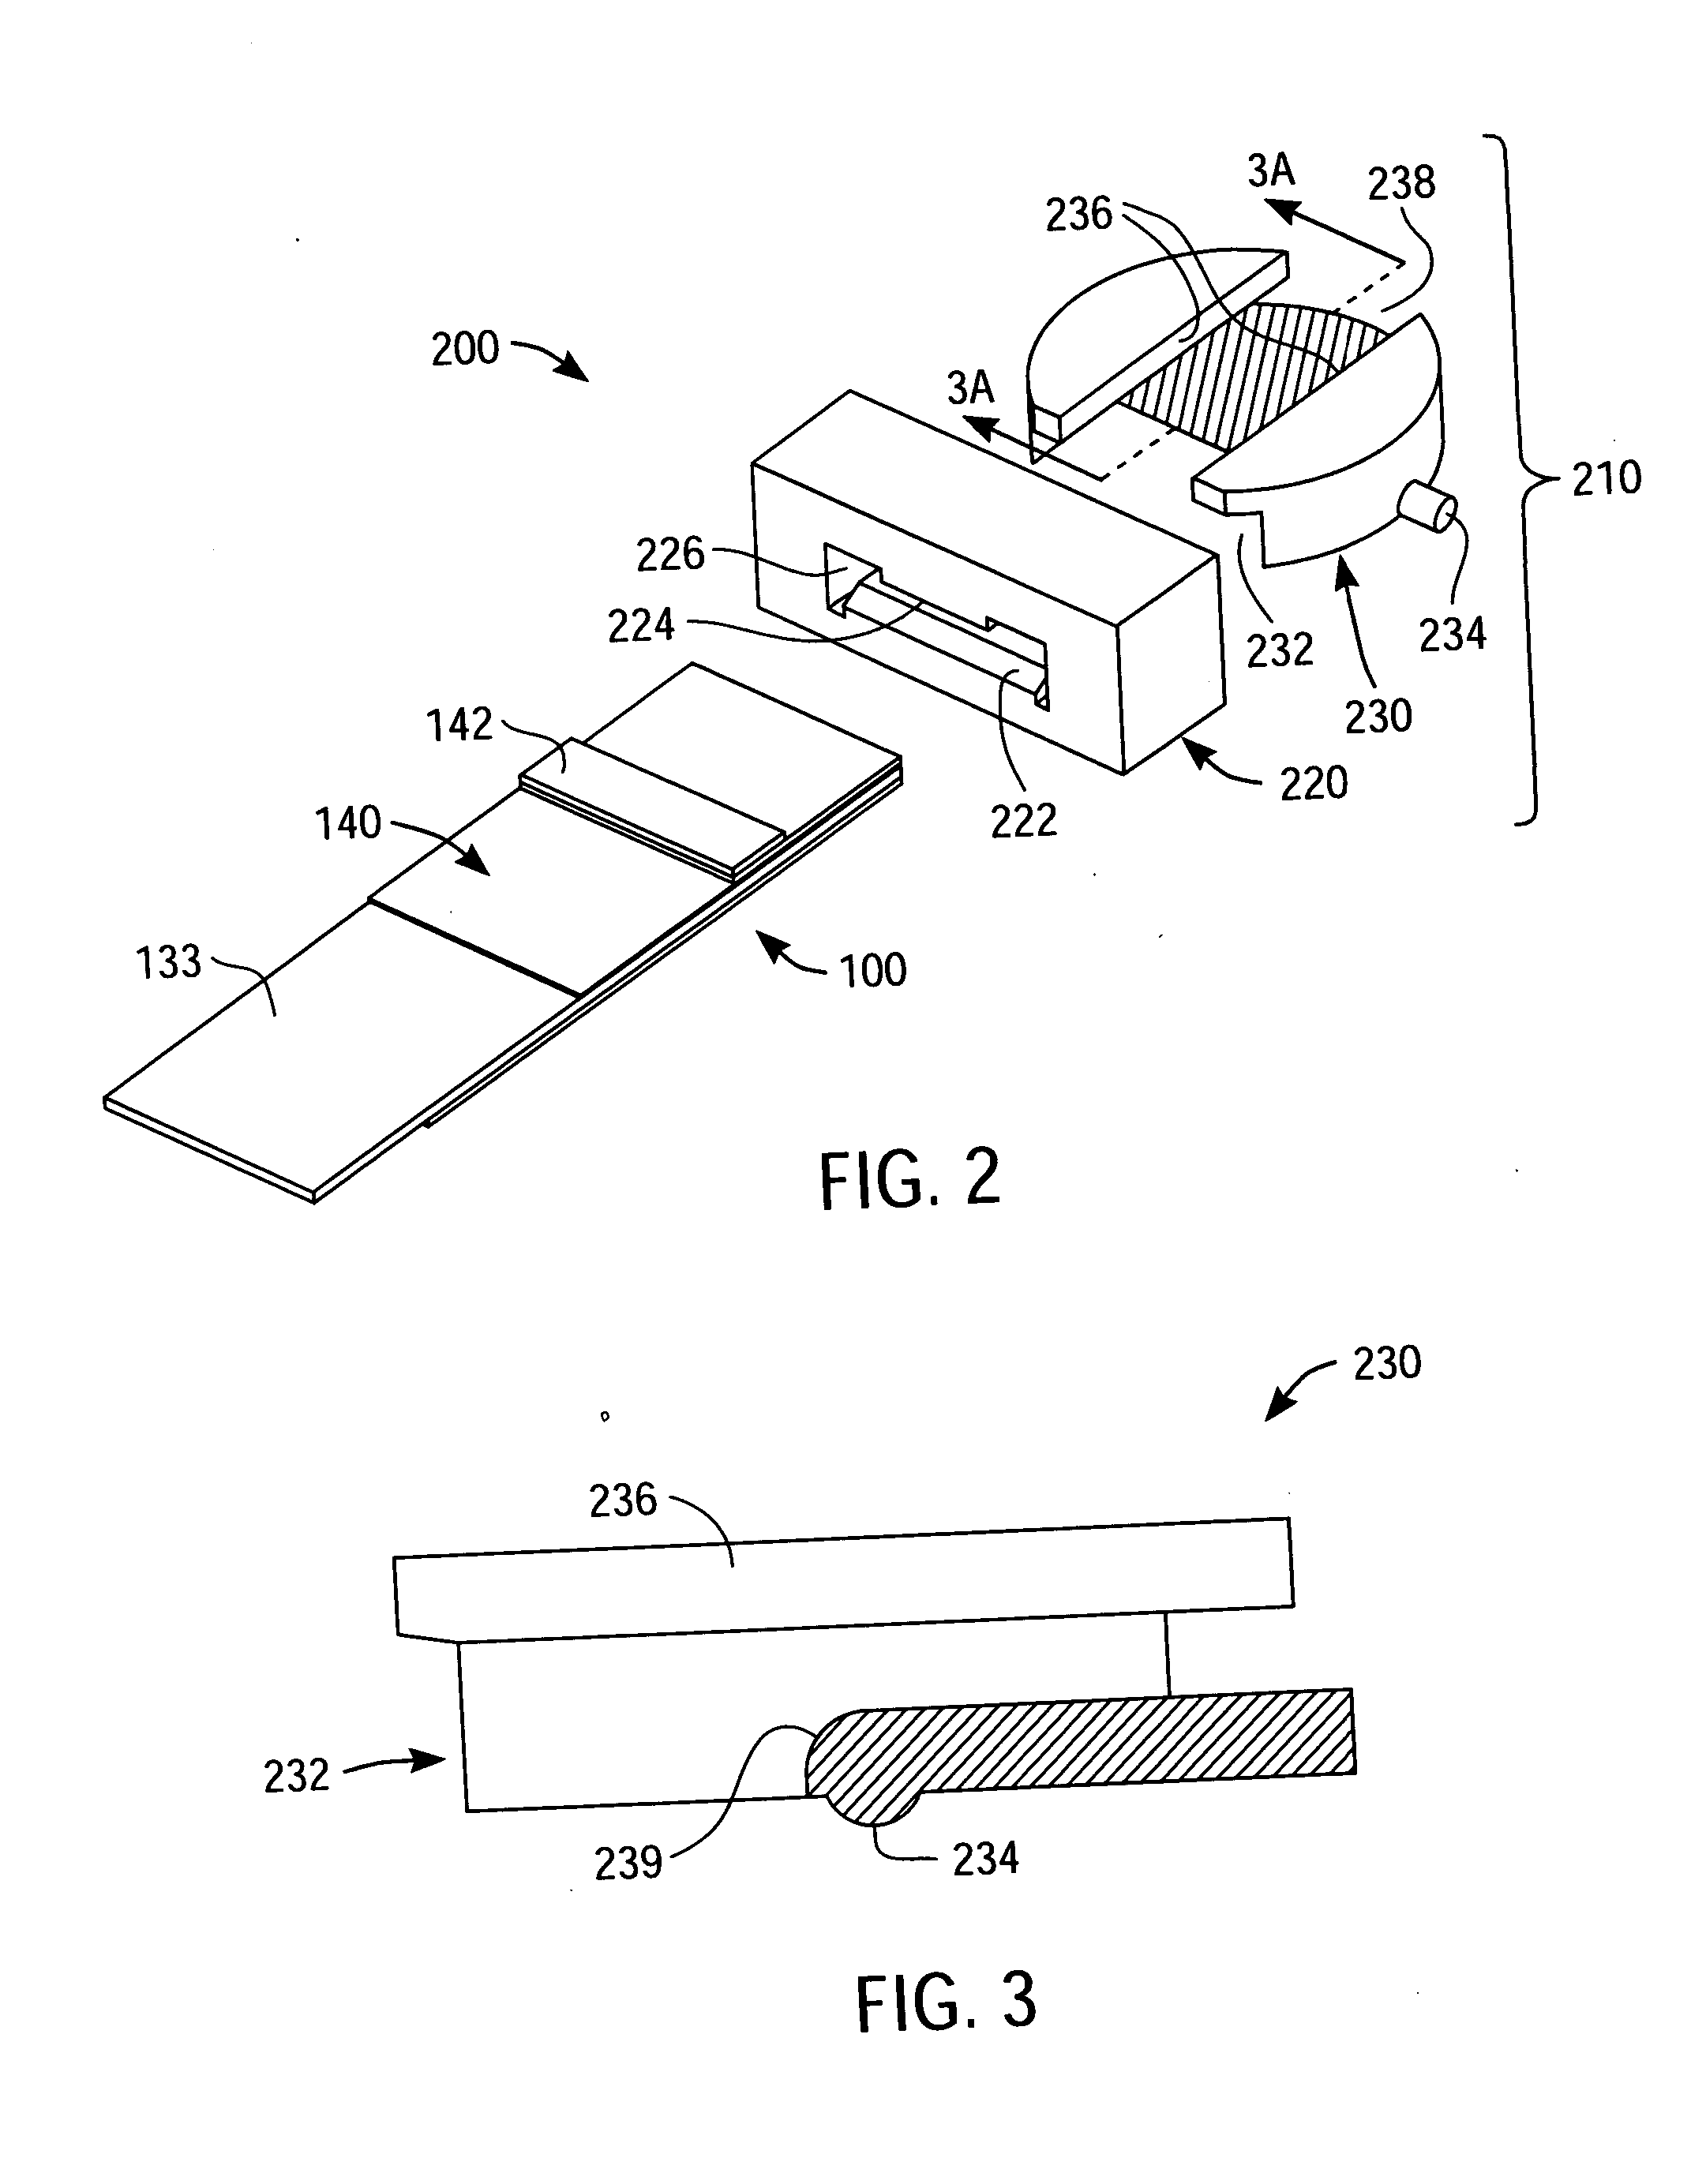 Packaged medical device with a deployable dermal tissue penetration member